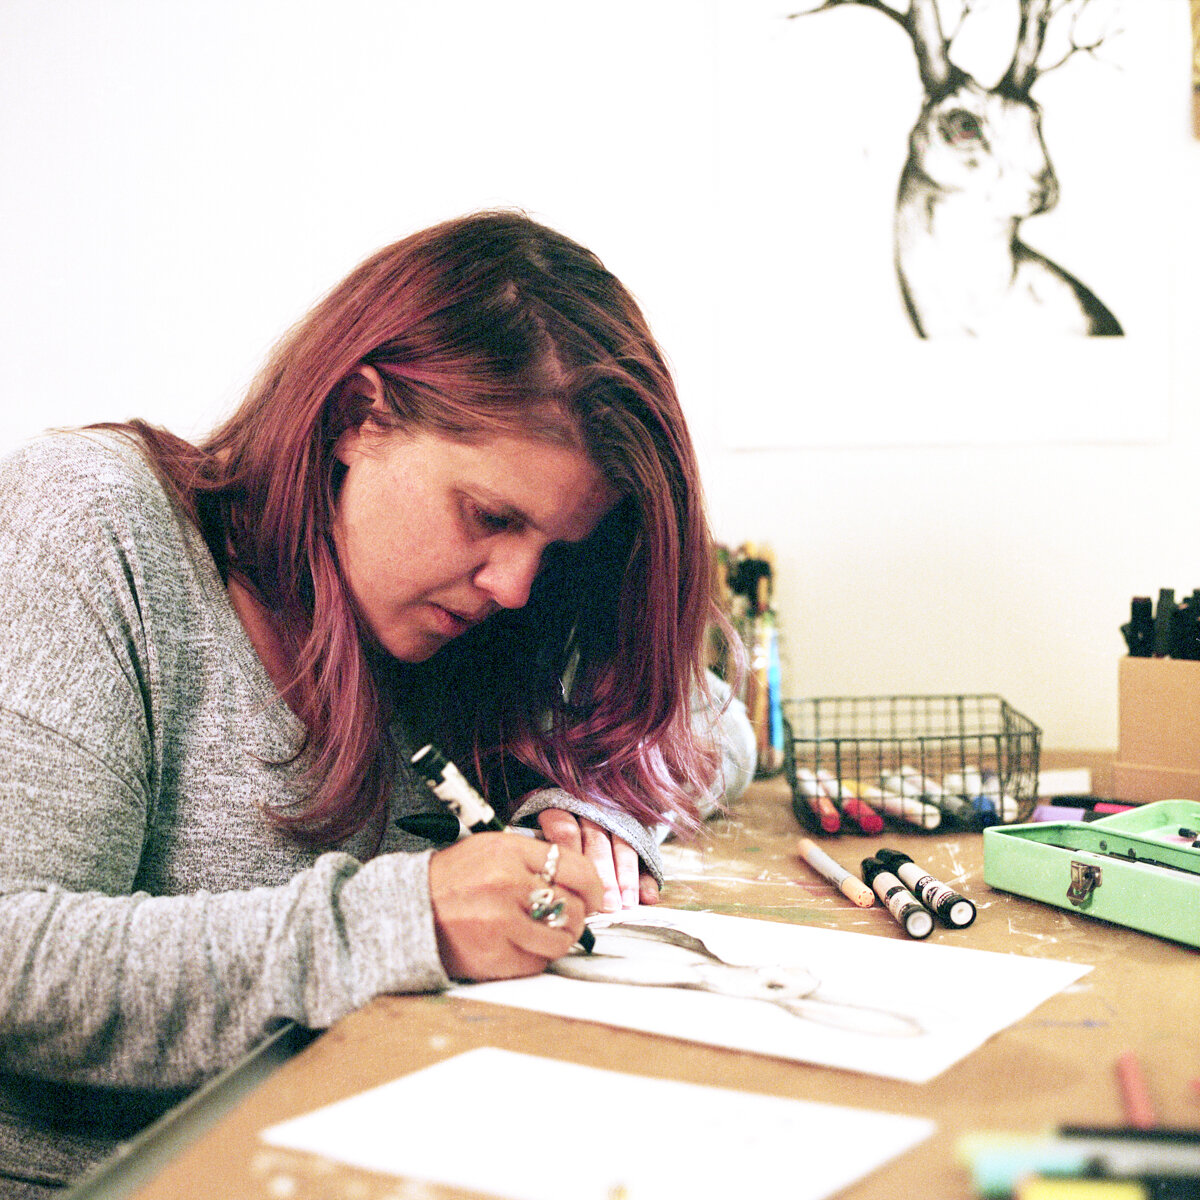 Kristy Boisvert (Foxpoint Paper Illustrations) draws a cartoon rabbit for a children's book in her home studio in Montréal, Canada.